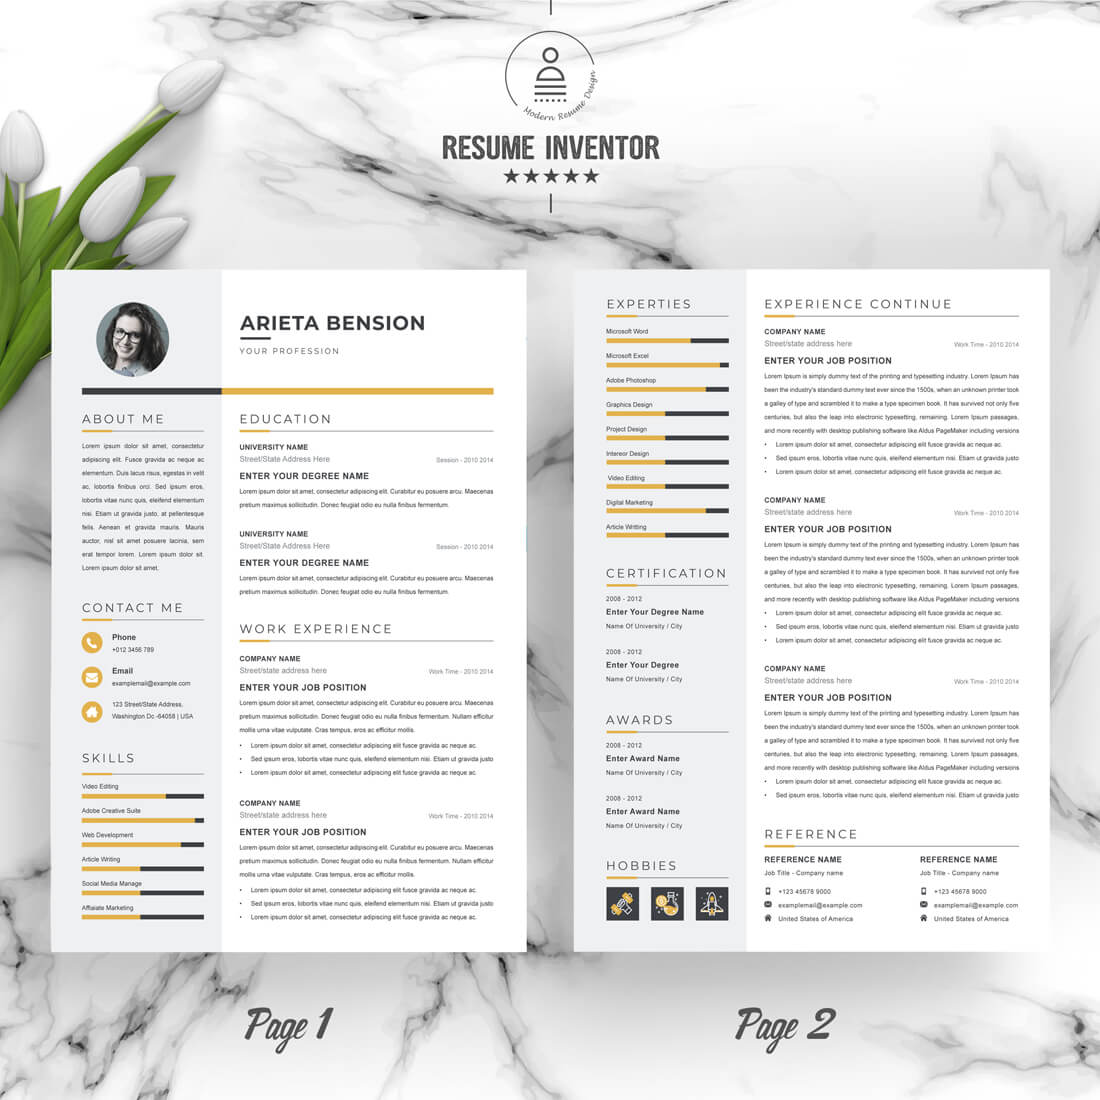 Sleek and Professional Resume Template for Career Advancement in Business, Finance, and Management Fields preview image.